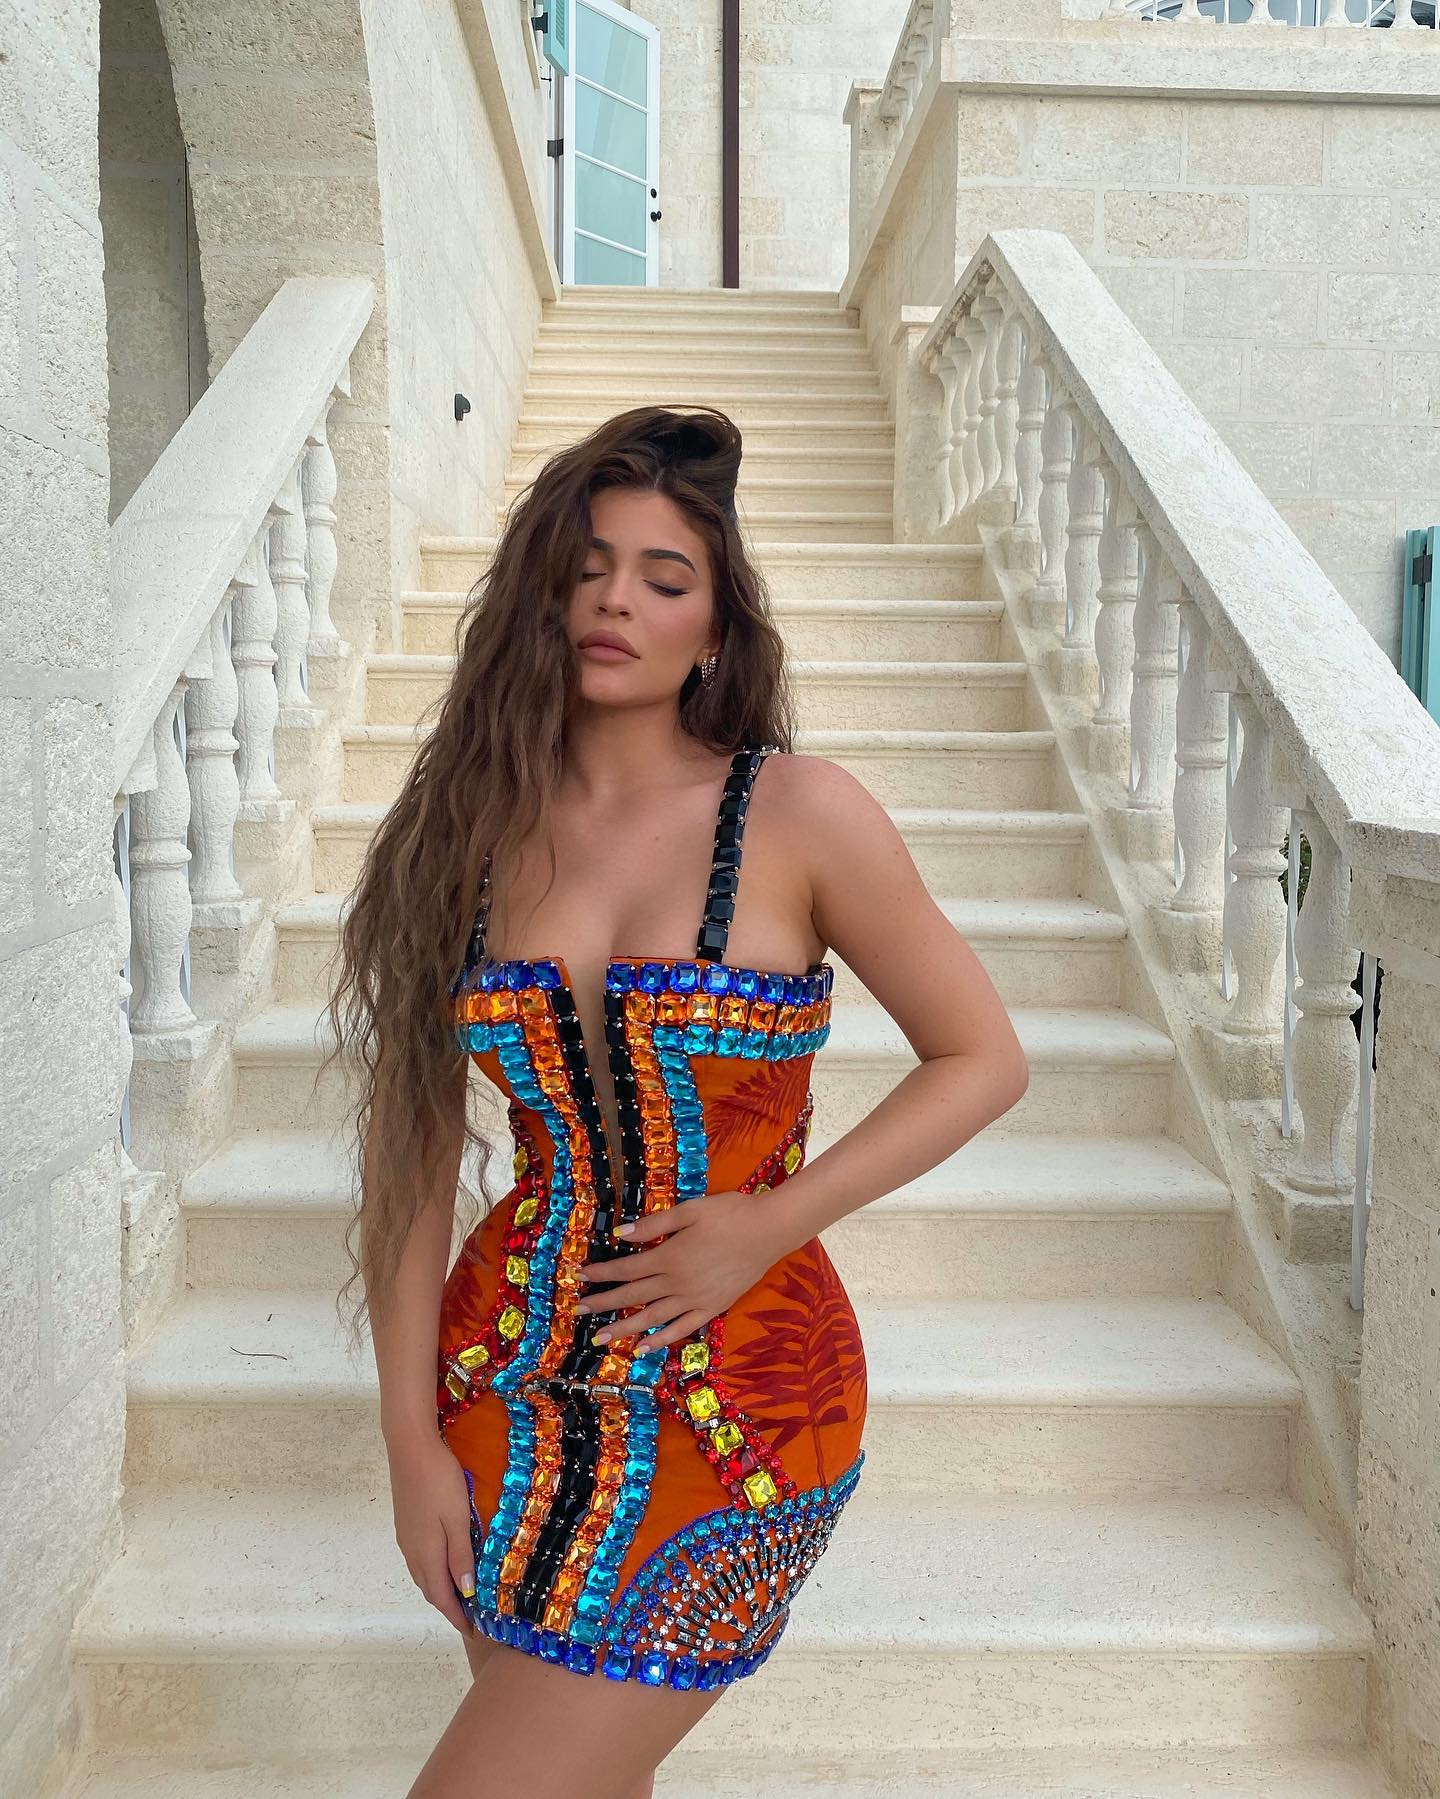 Kylie Jenner in the Caribbean! - Photo 7